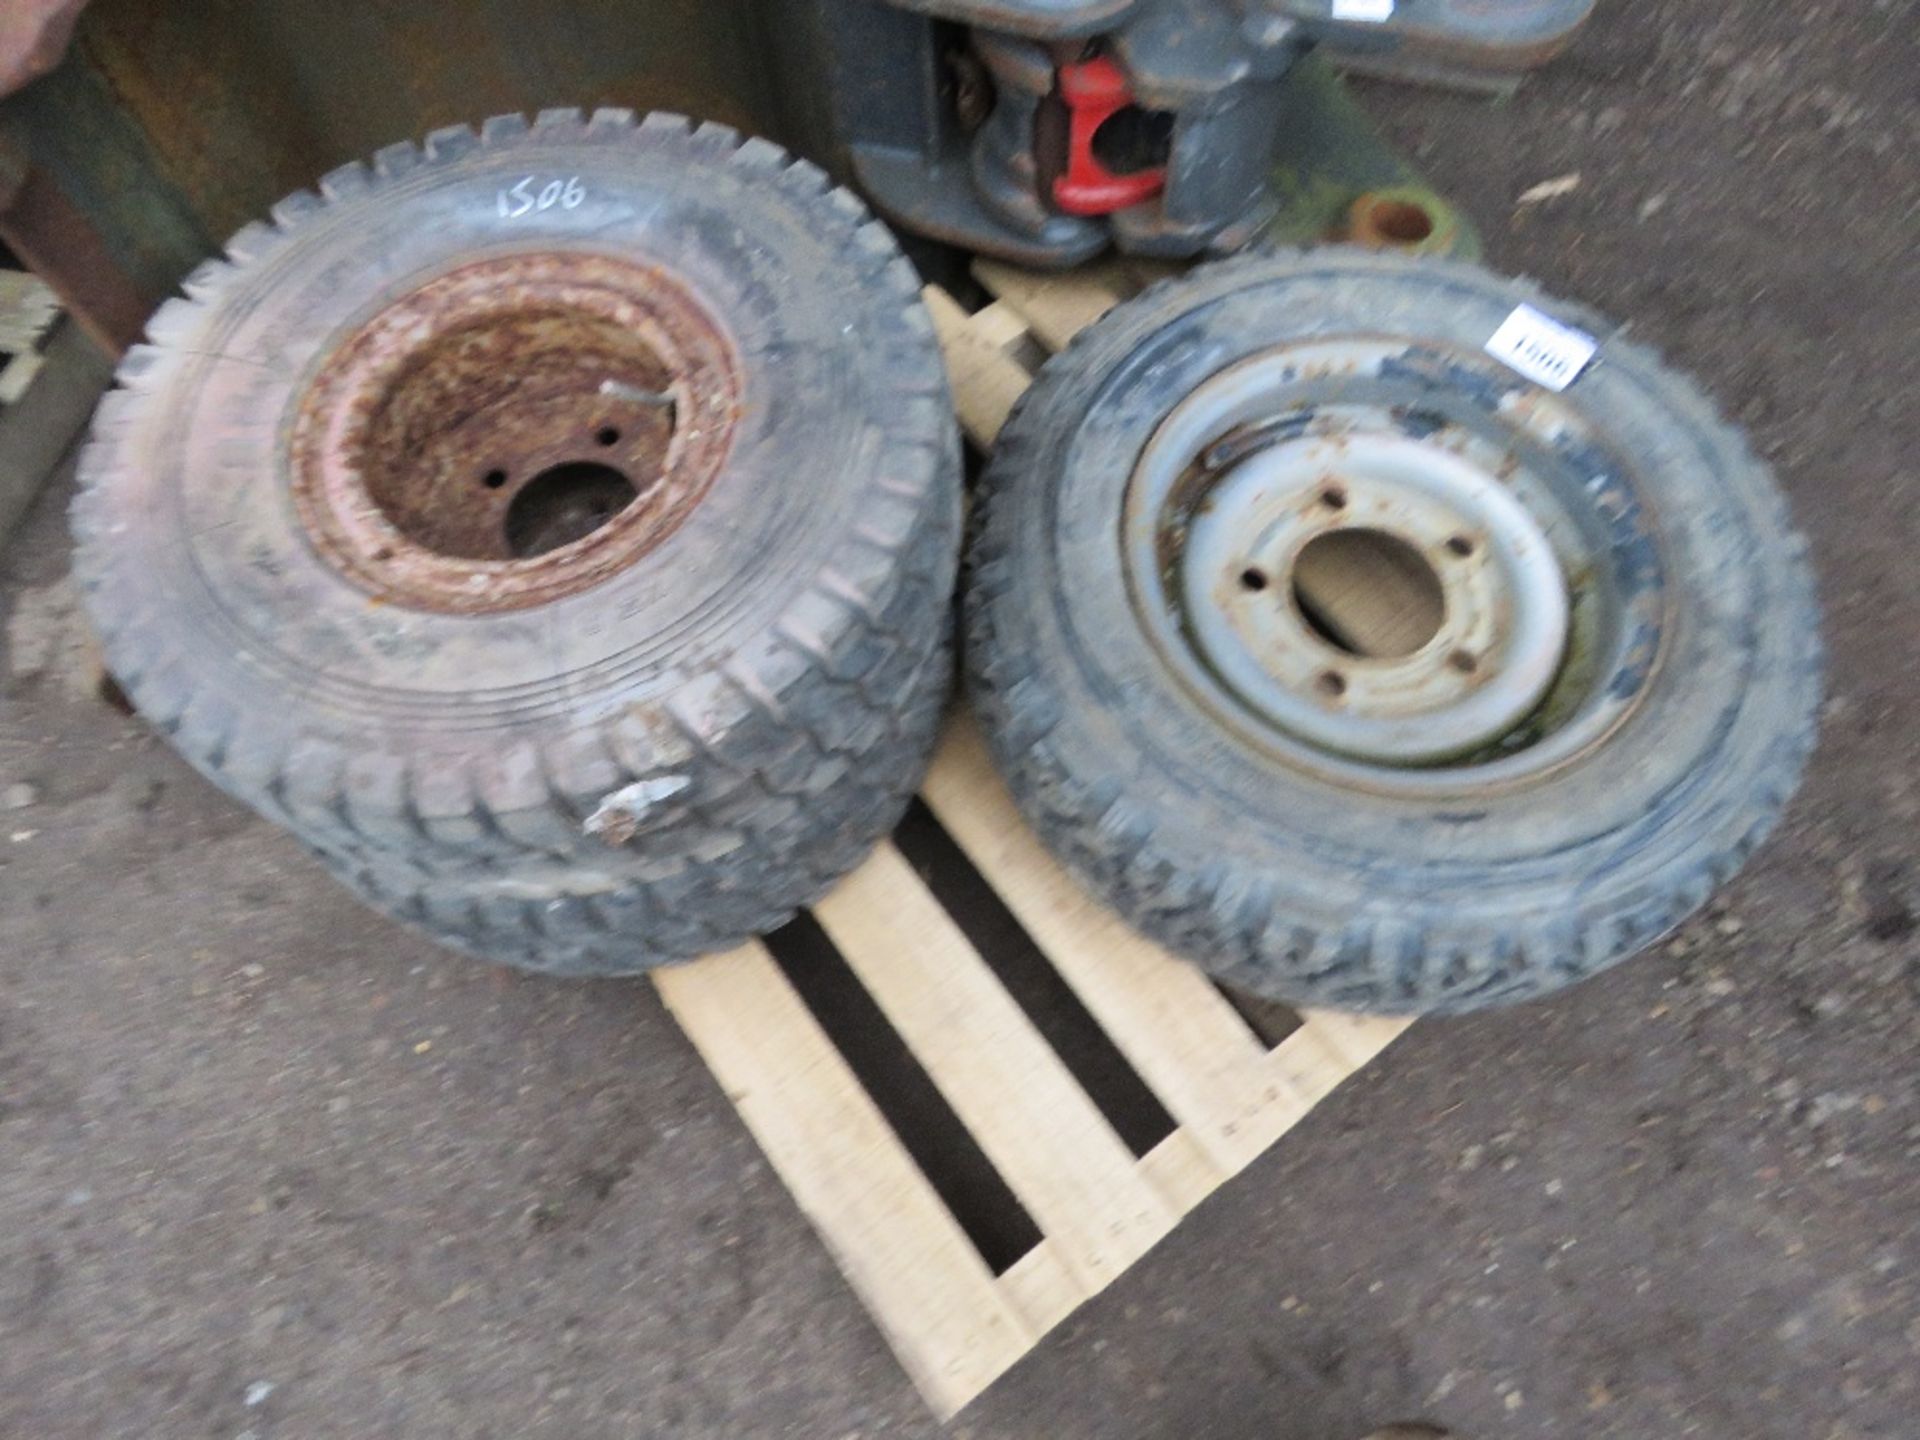 3 X TRAILER WHEELS AND TYRES.